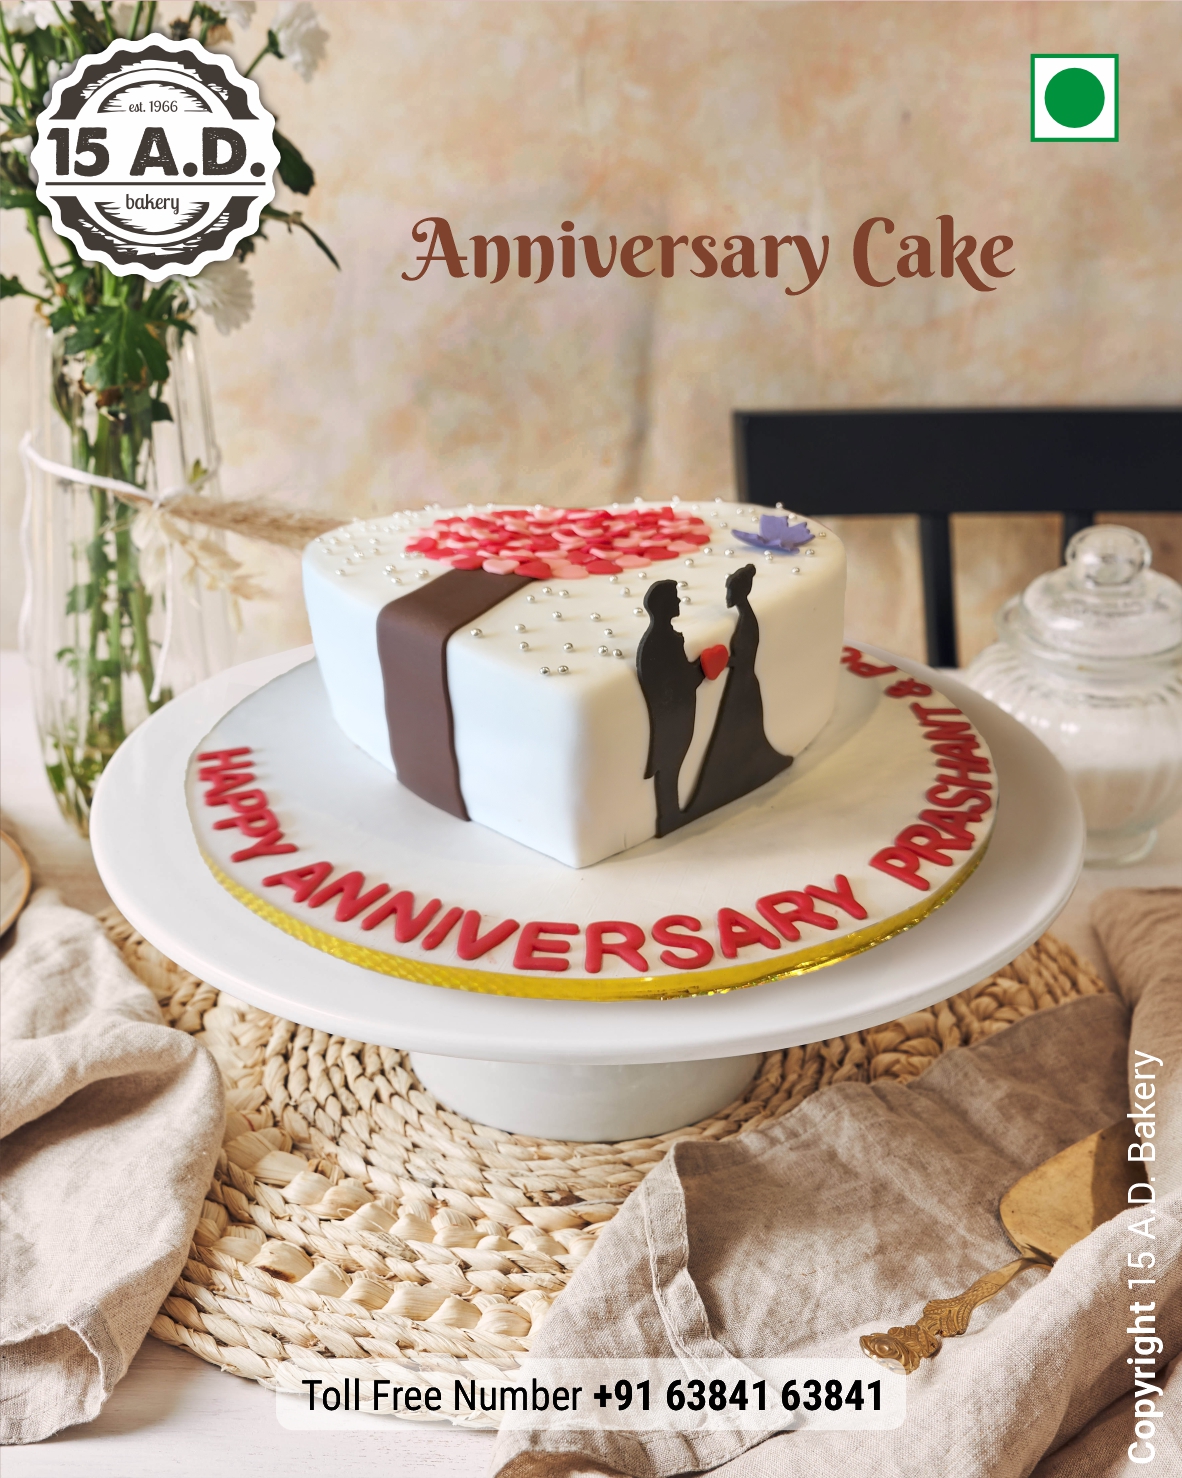 Anniversary Cake by 15 AD Bakery